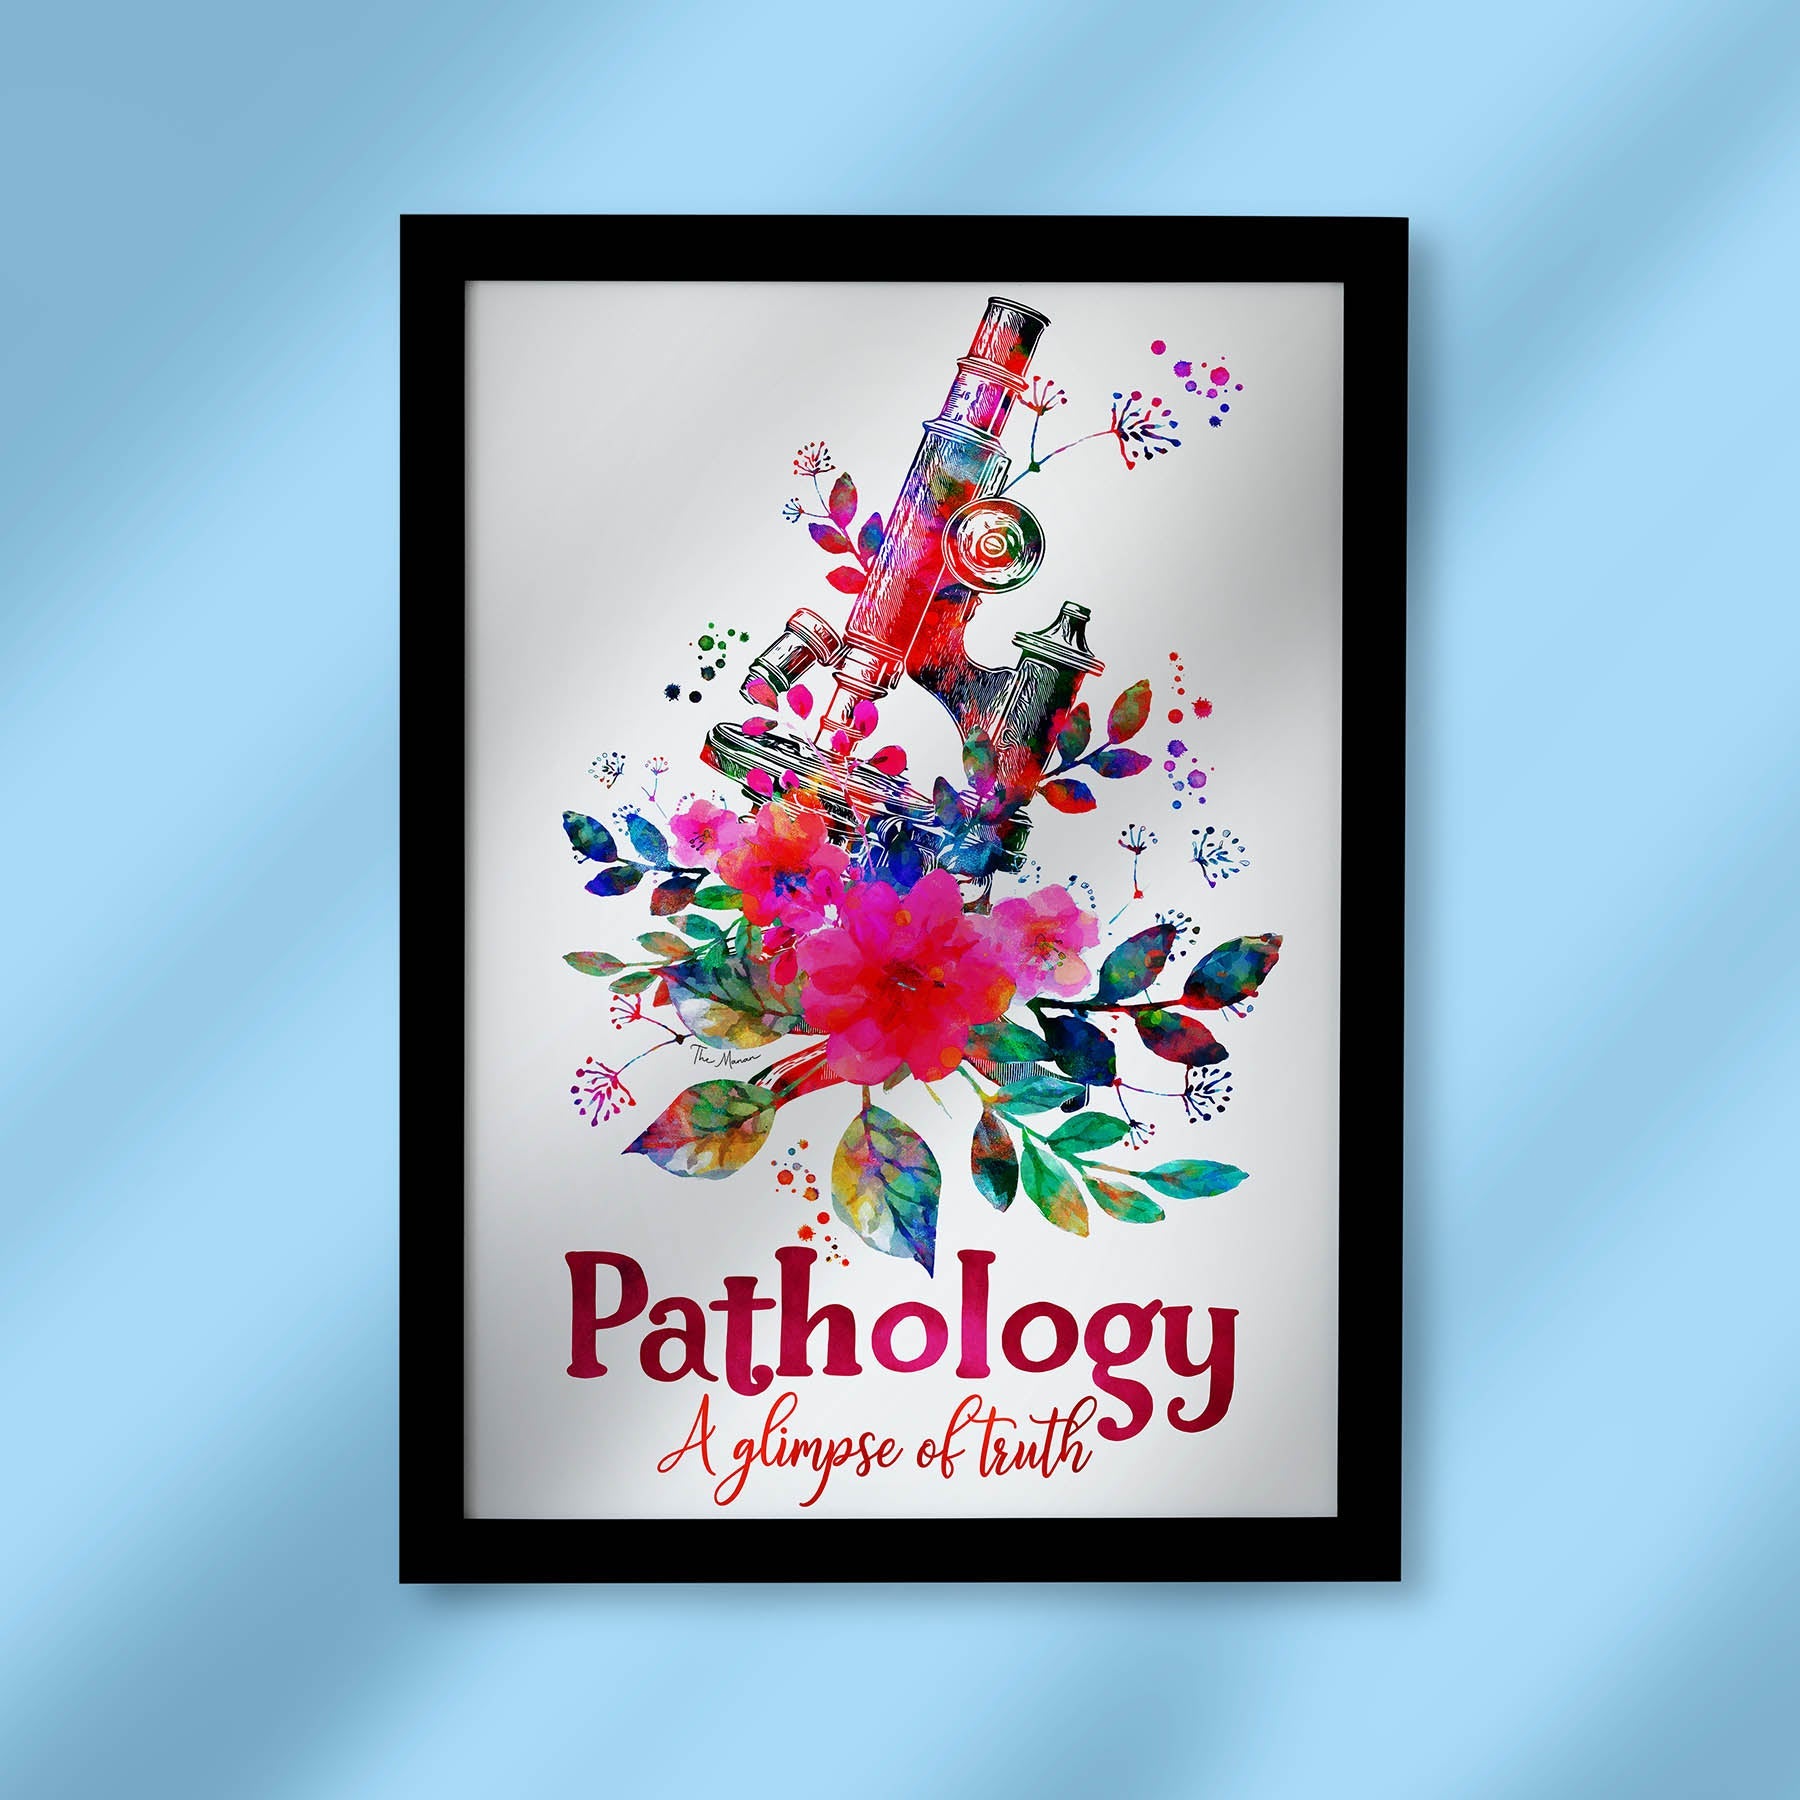 Pathology - A Glimpse Of Truth - Framed Poster For Clinics, Laboratories, Hospitals etc.